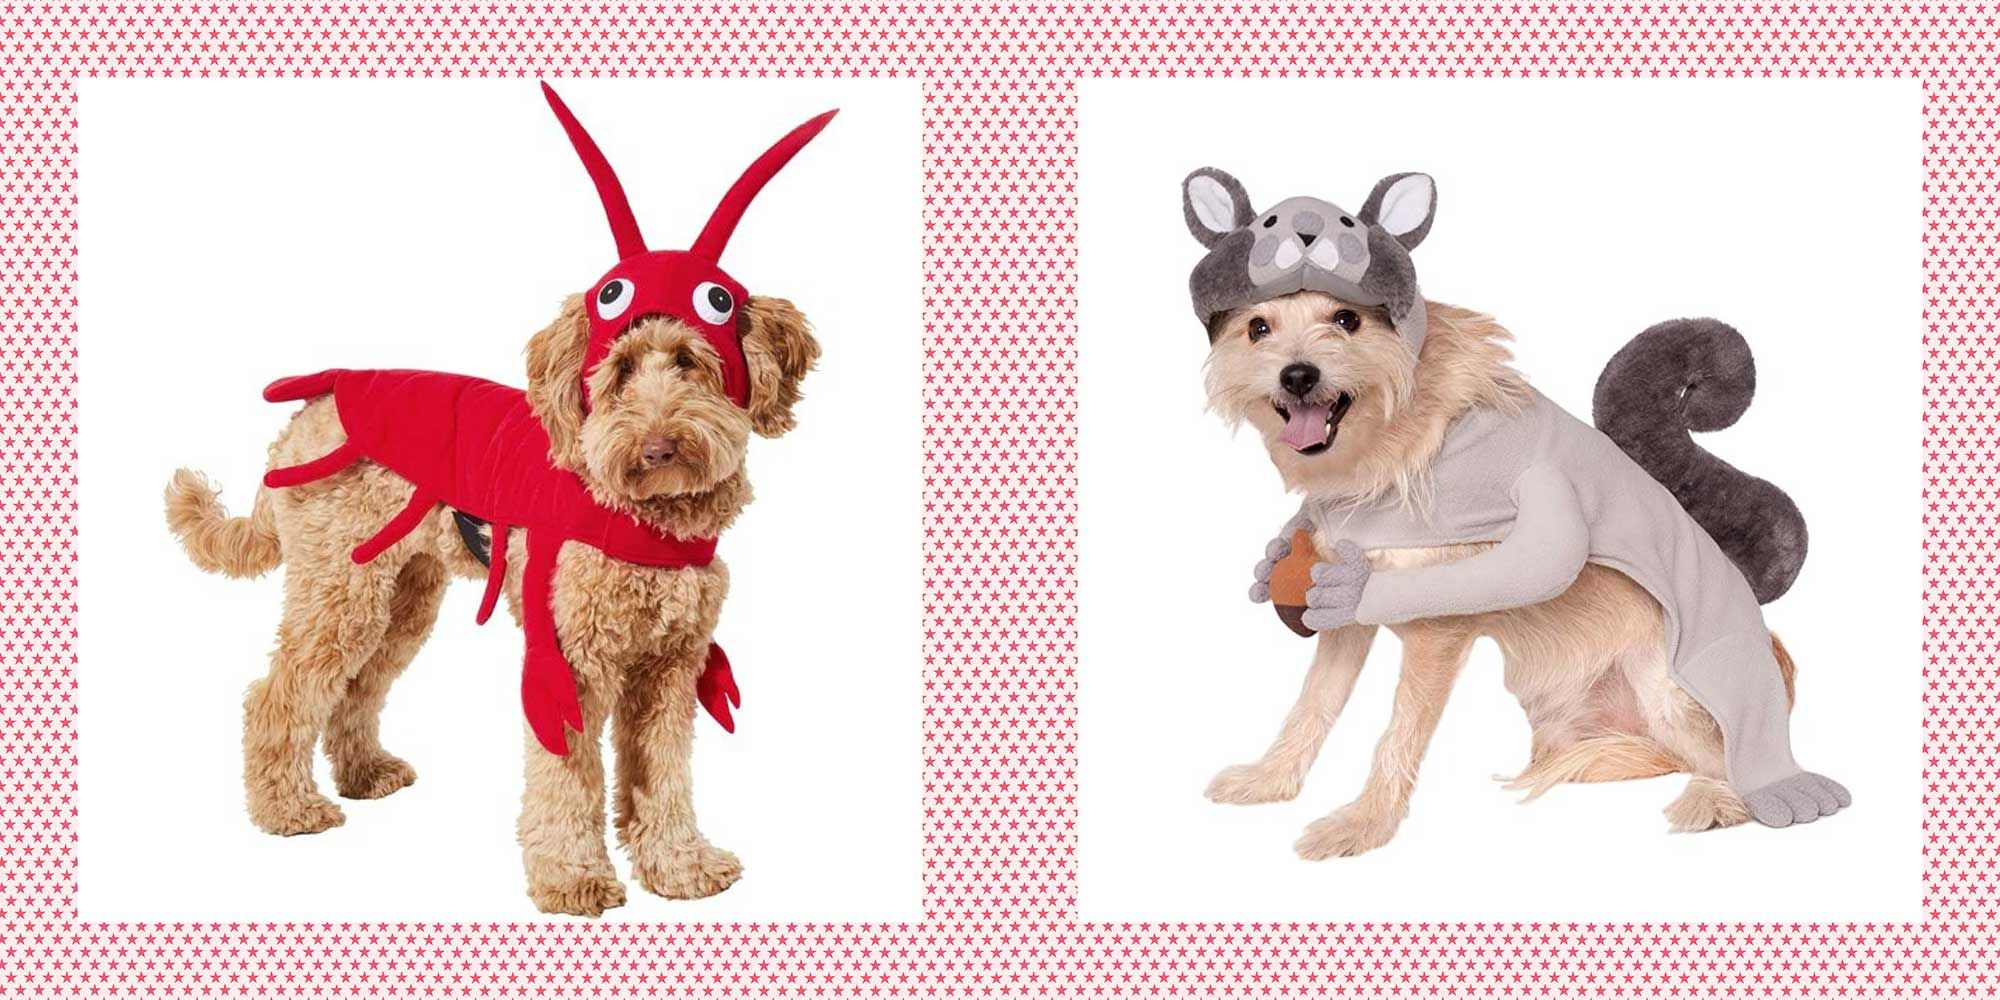 42 Best Dog Halloween Costumes - Funny and Cute Dog Costume Ideas